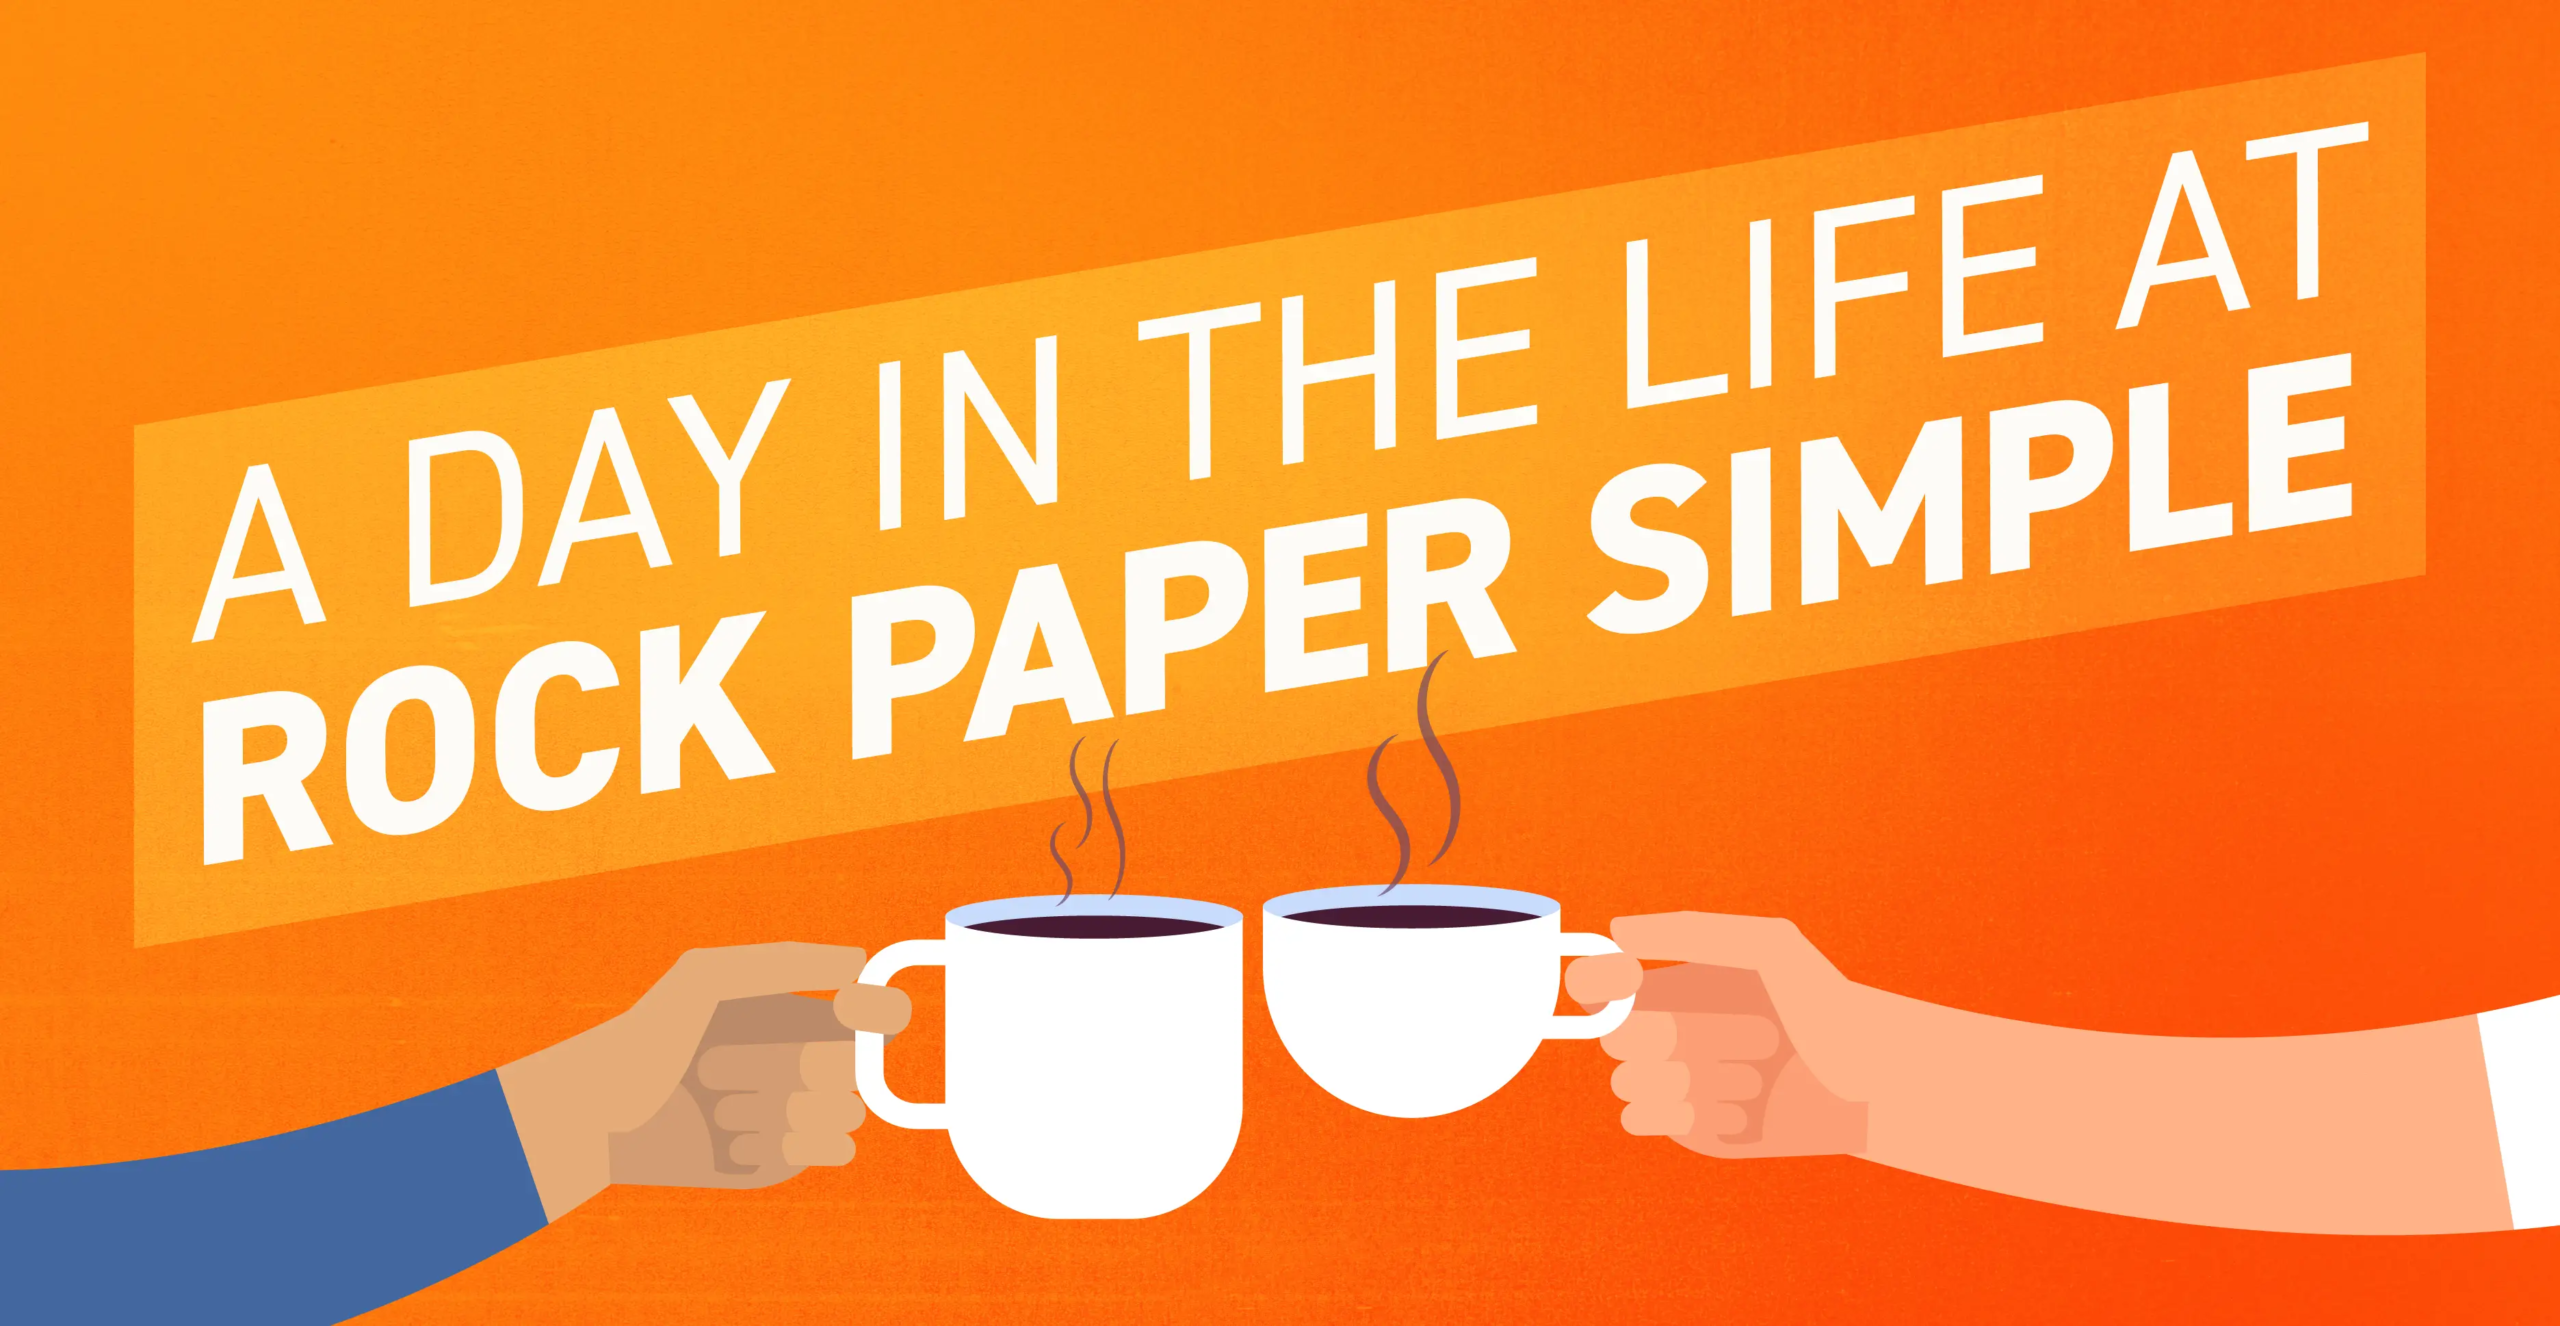 A Day in the Life at Rock Paper SImple